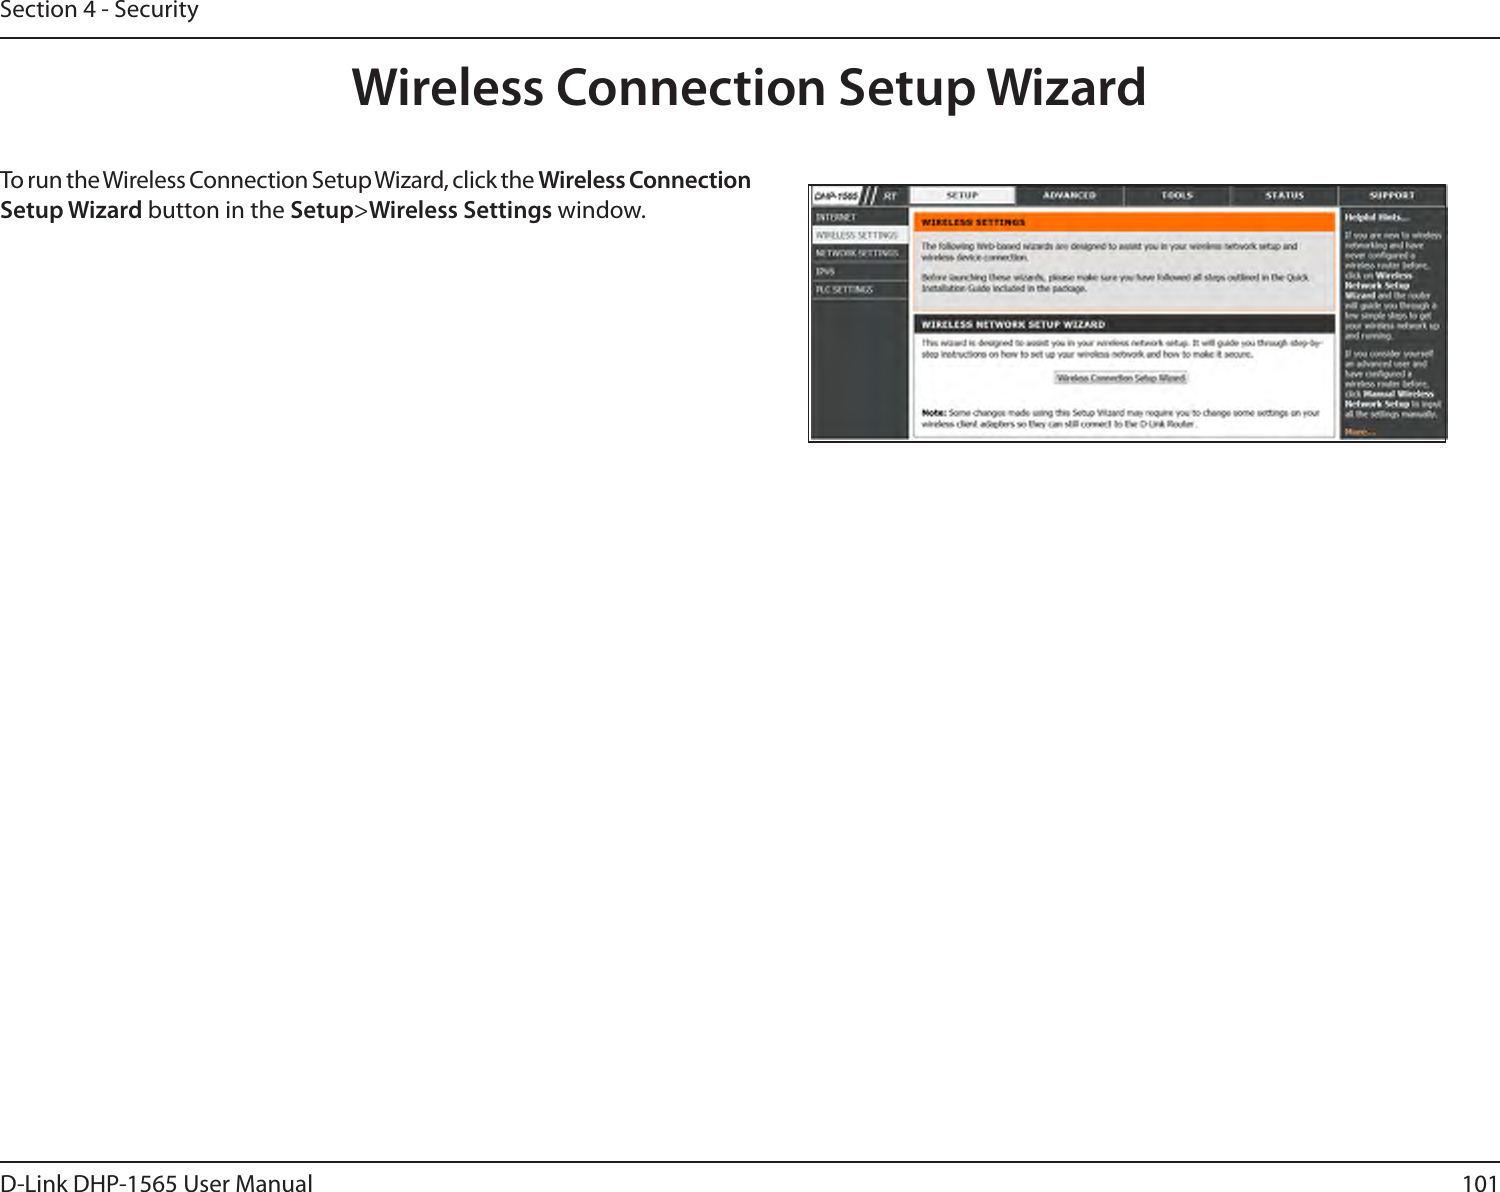 101D-Link DHP-1565 User ManualSection 4 - SecurityWireless Connection Setup WizardTo run the Wireless Connection Setup Wizard, click the Wireless Connection Setup Wizard button in the Setup&gt;Wireless Settings window.